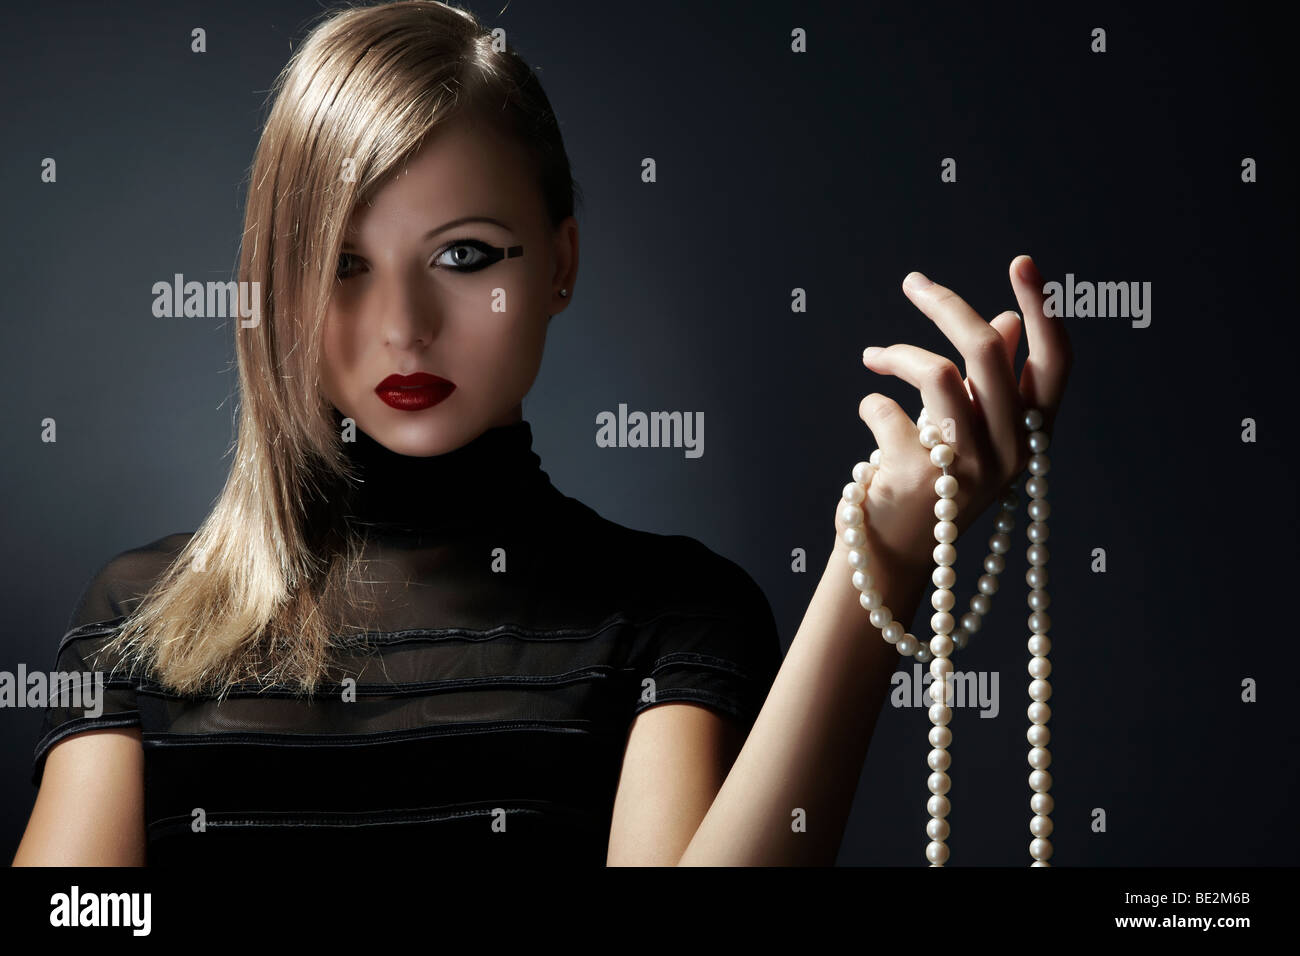 Young blond woman wearing a black dress holding a pearl necklace in her hand, fashion Stock Photo